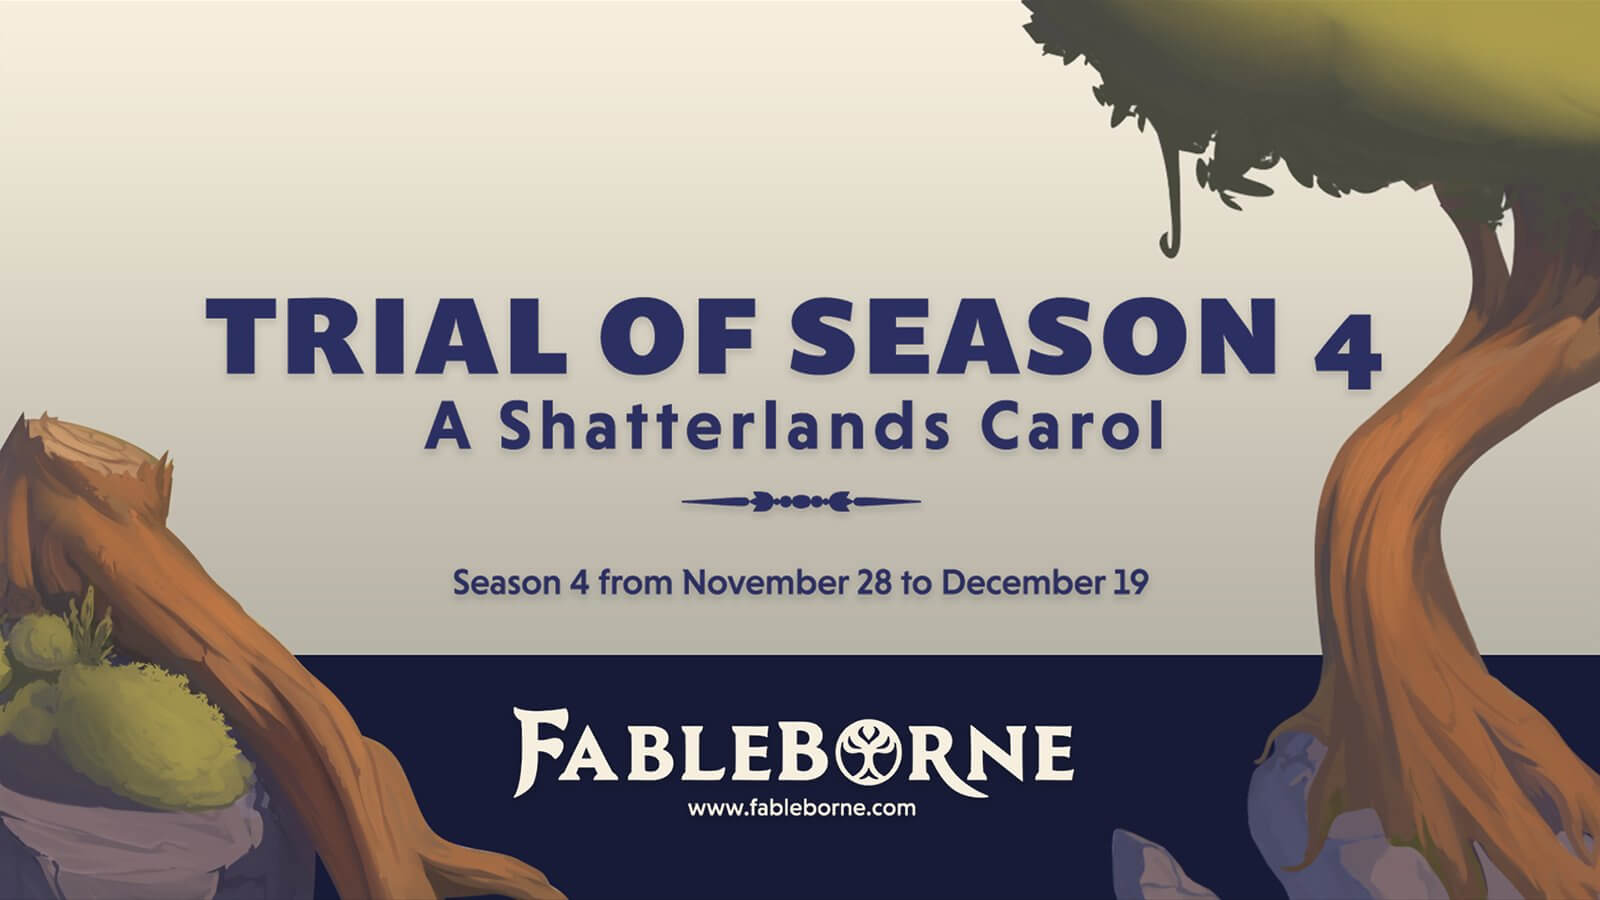 Fableborne Launches Trial of Season 4: A Shatterlands Carol